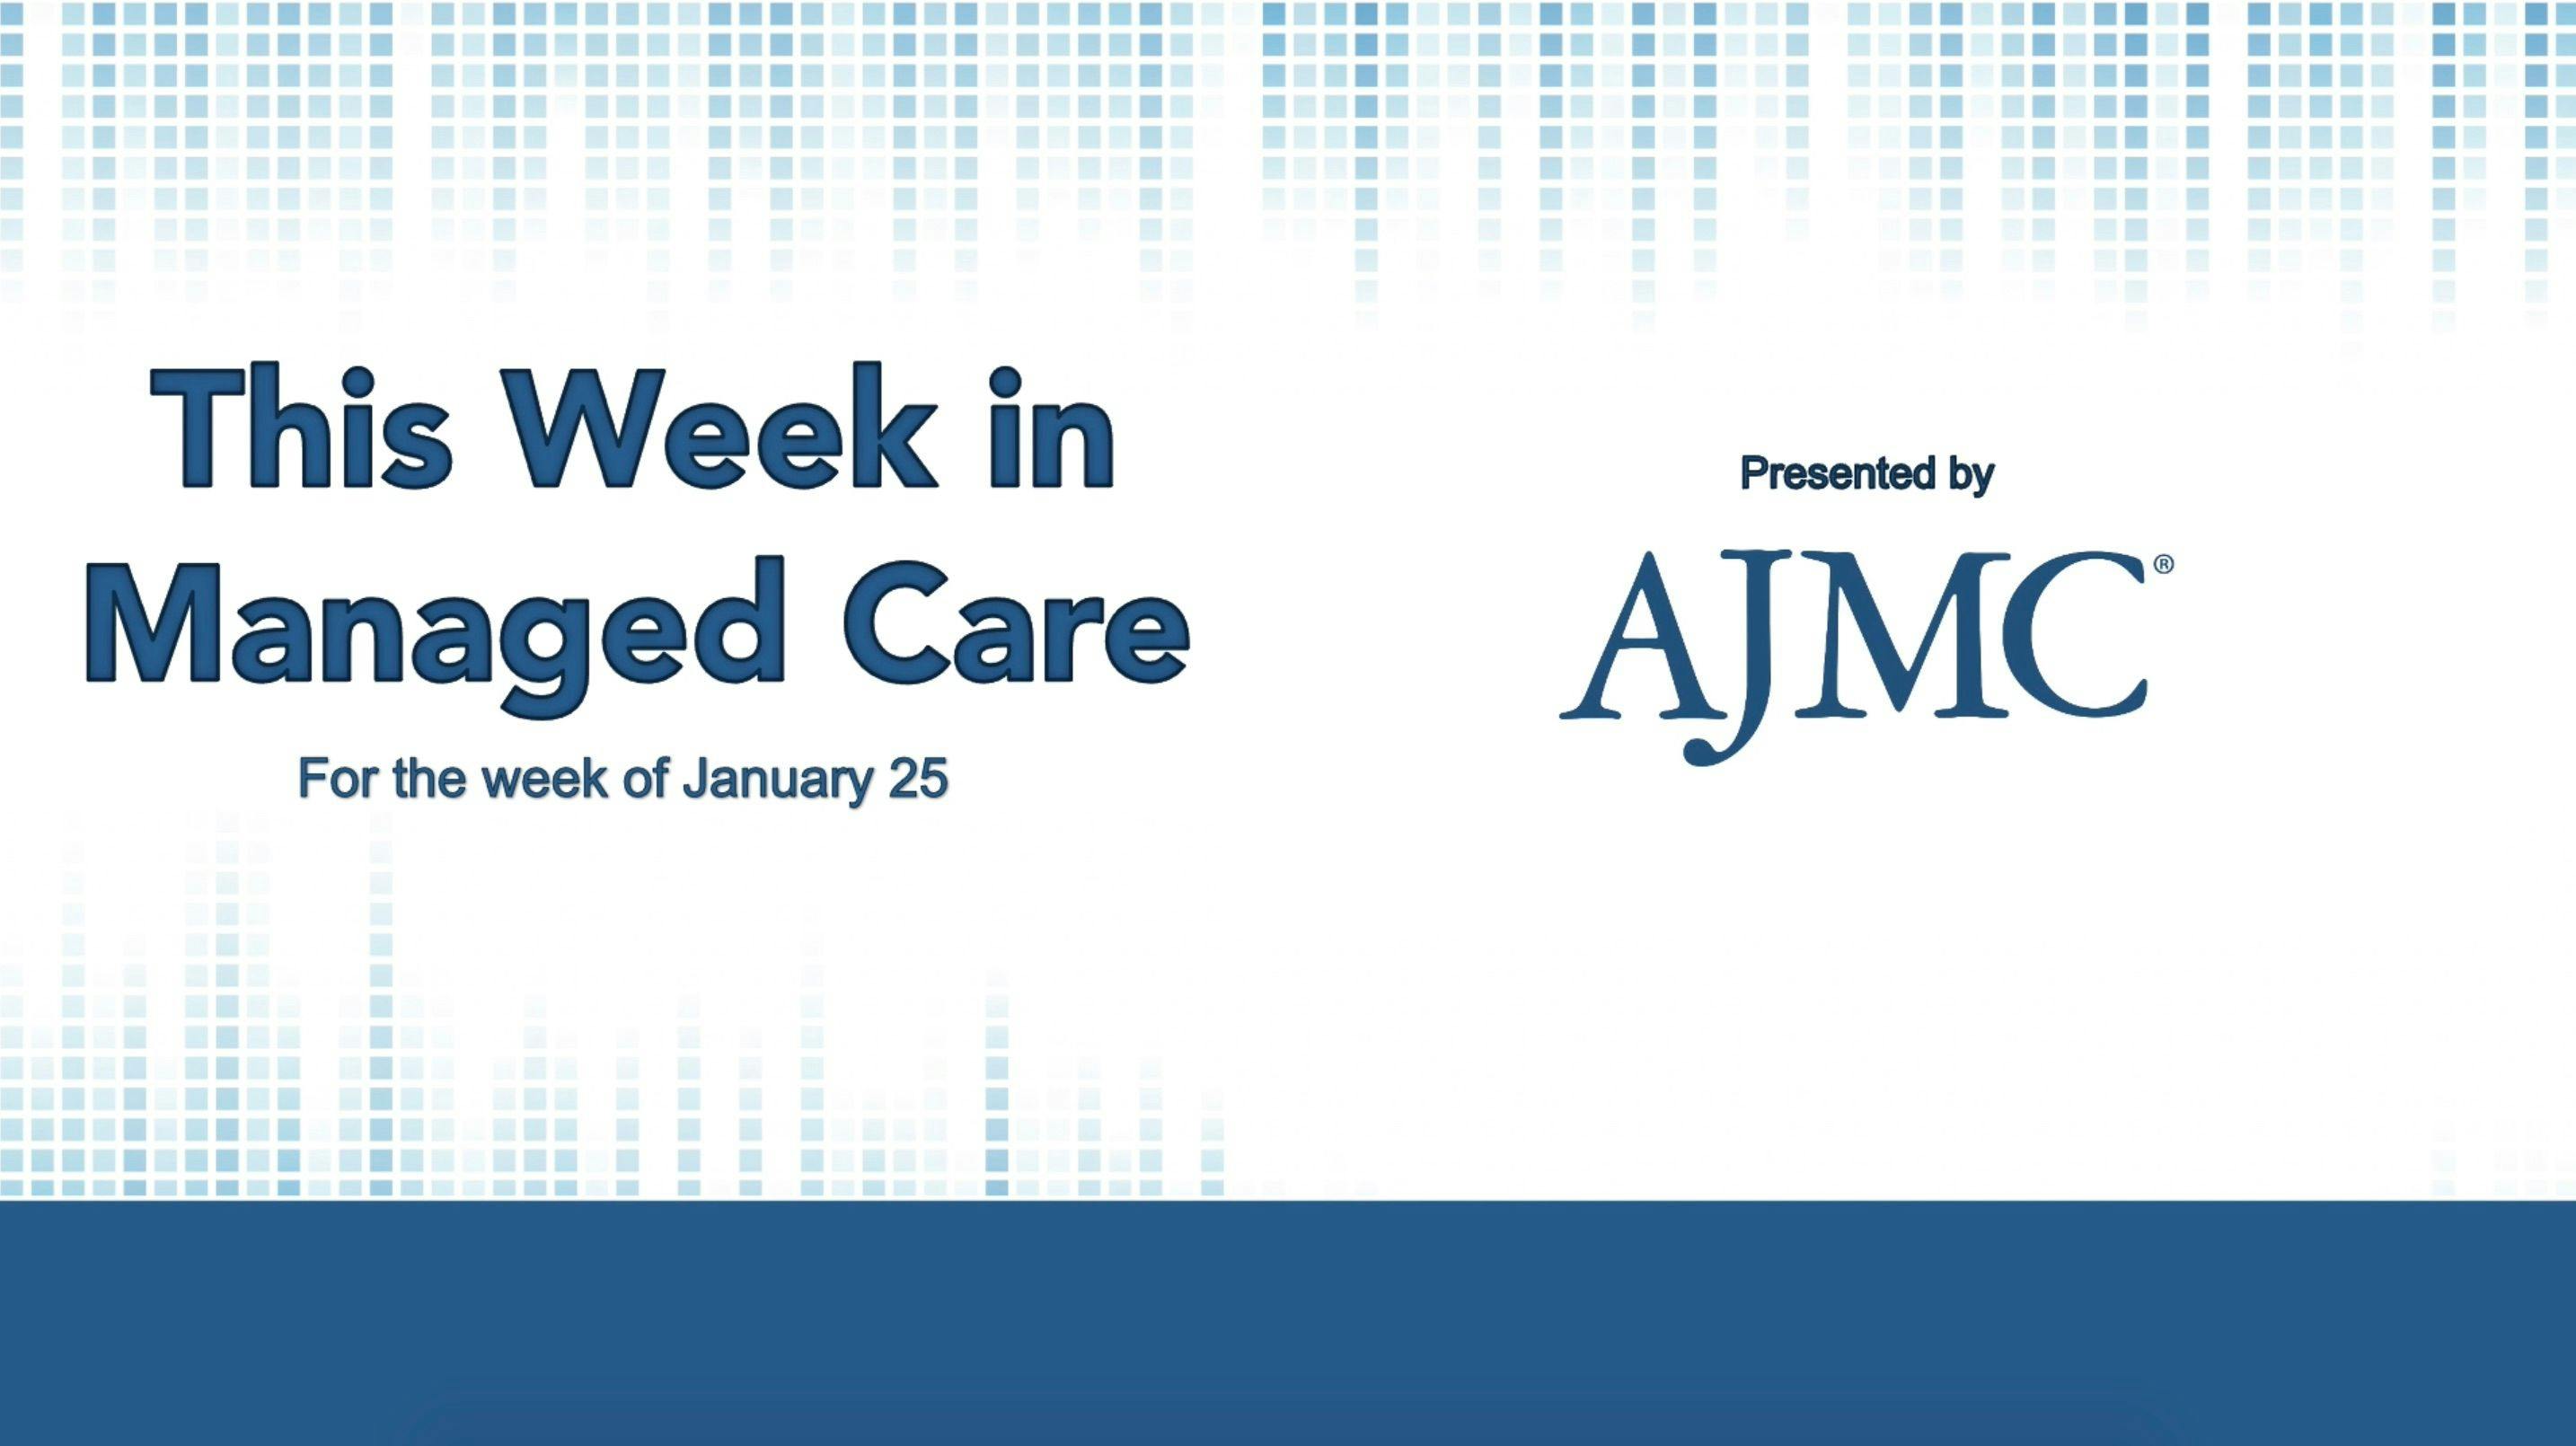 This Week in Managed Care: January 29, 2021